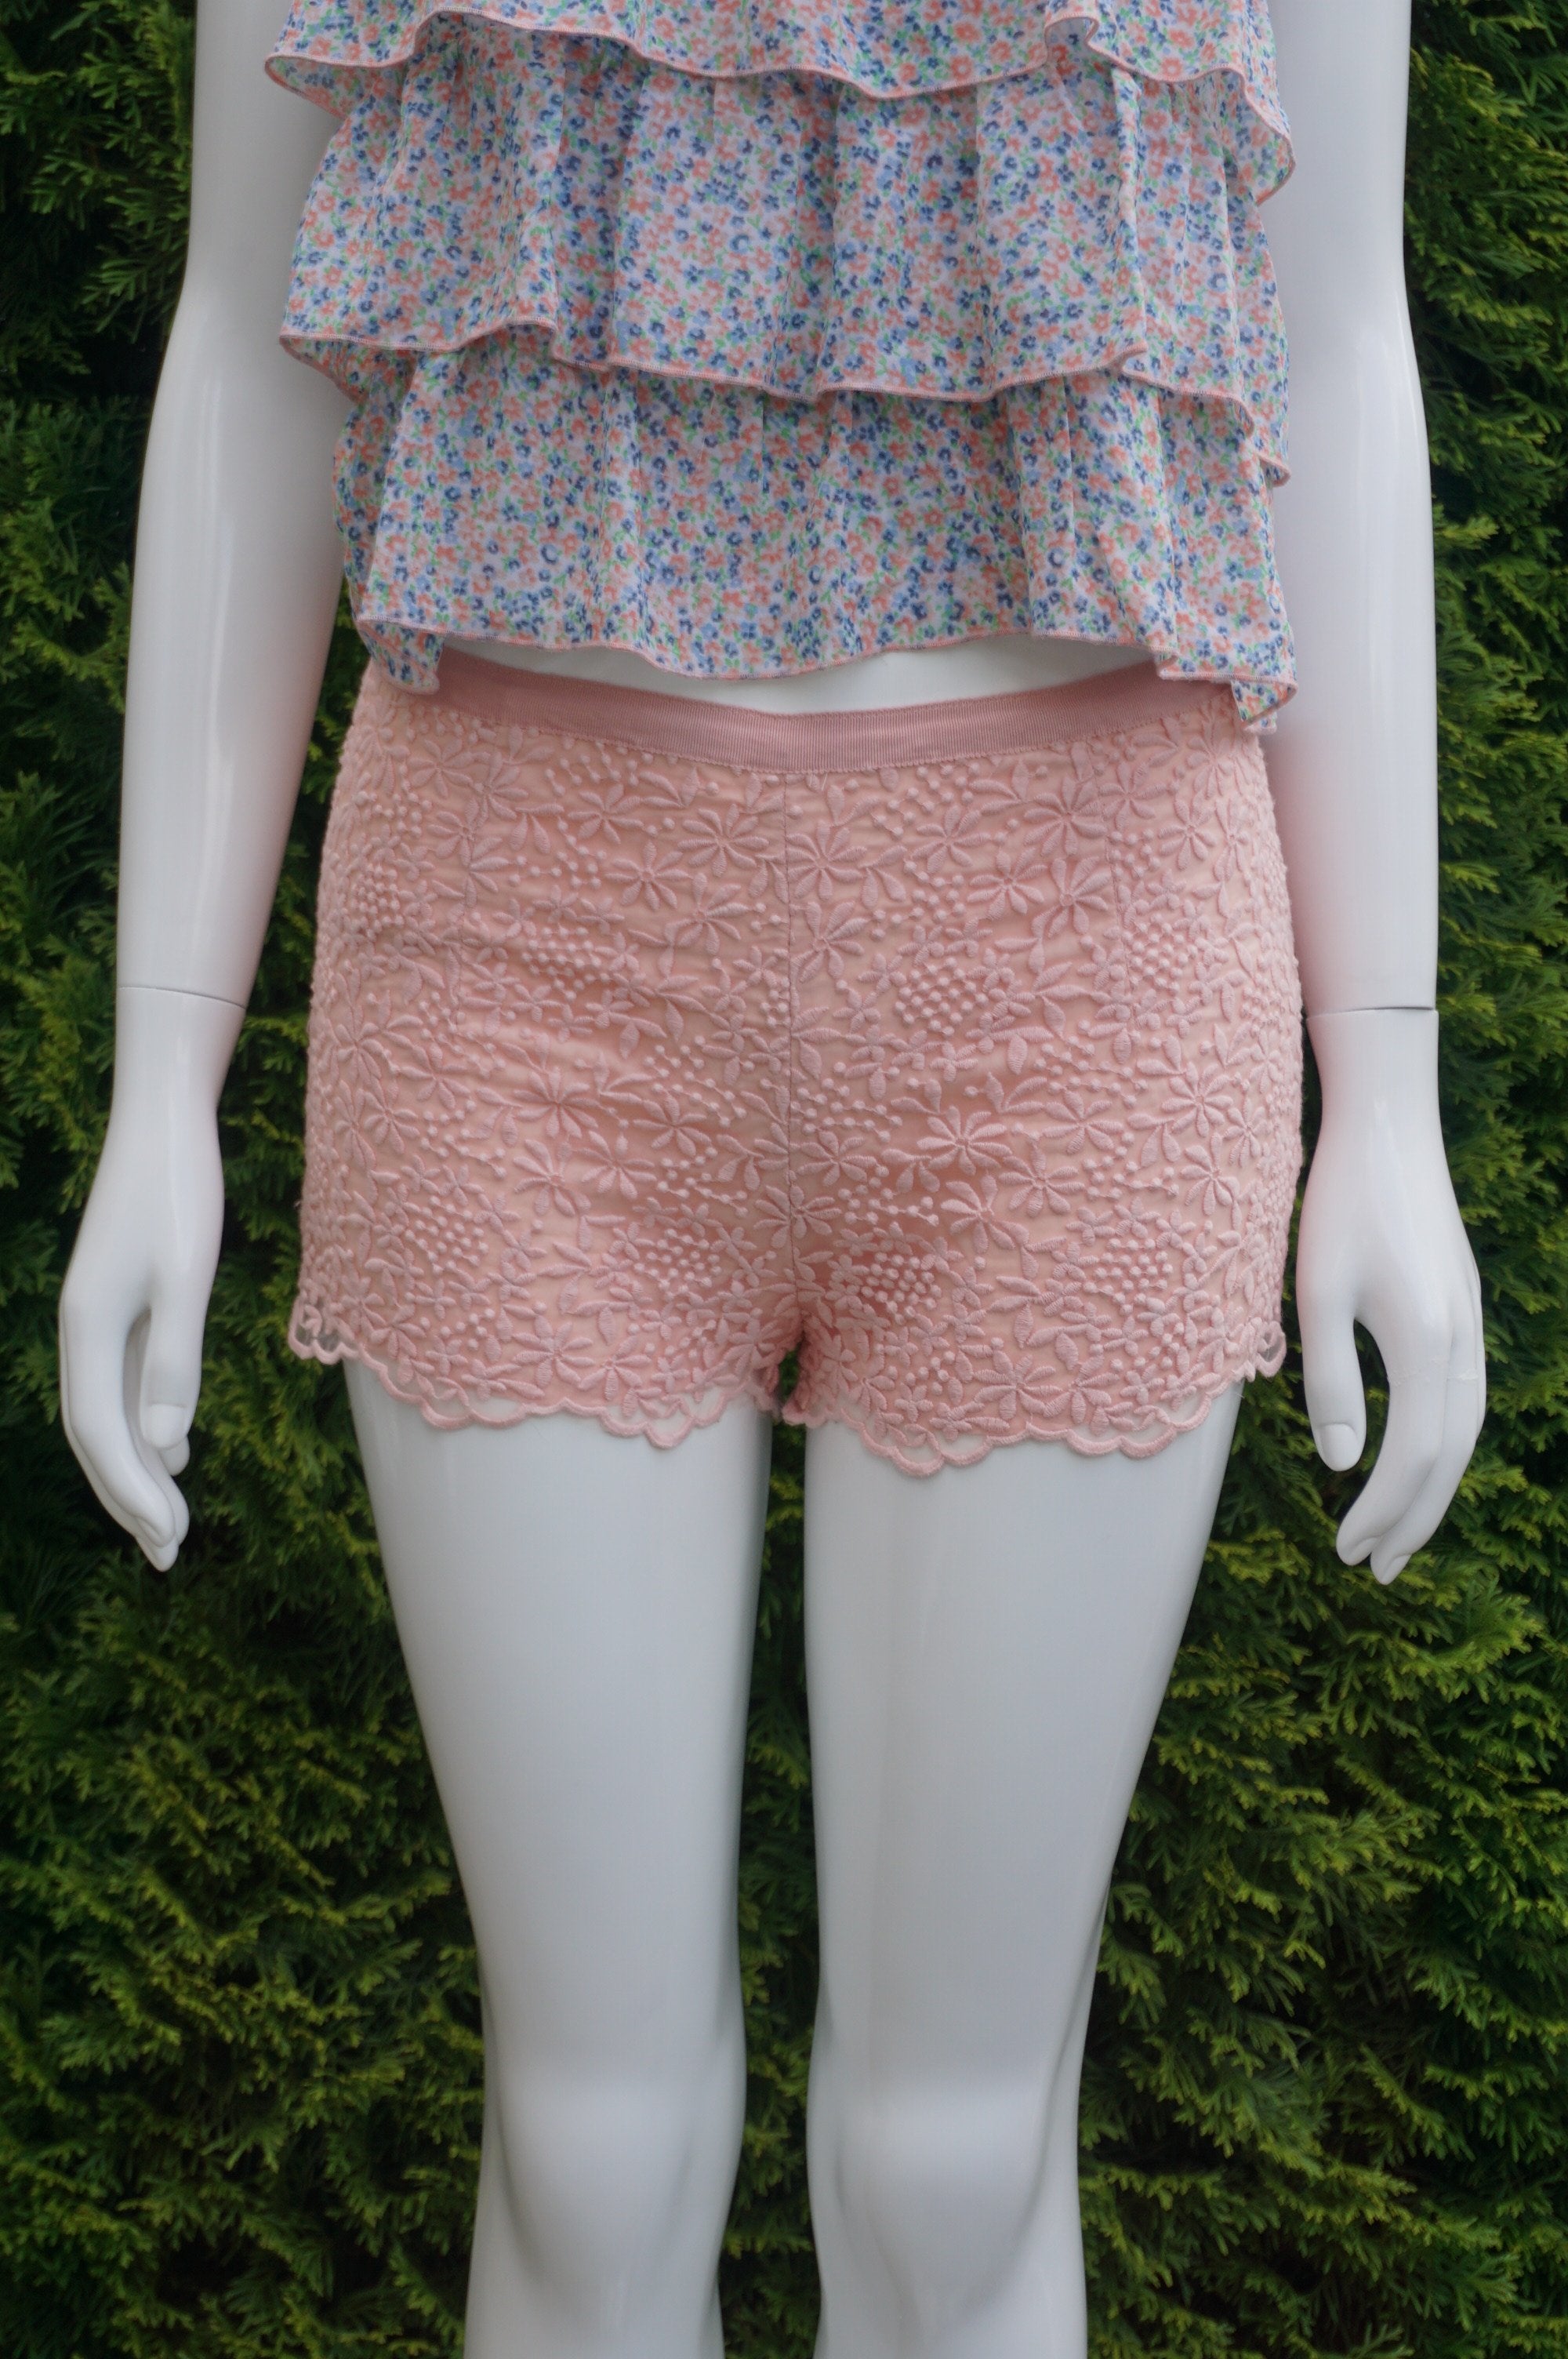 Forever 21 Pink Lace Shorts, Waist 28 inches, length 9.5 inches. Zipper on the left side, Pink, women's Skirts & Shorts, women's Pink Skirts & Shorts, Forever 21 women's Skirts & Shorts, lace shorts, cute summer shorts